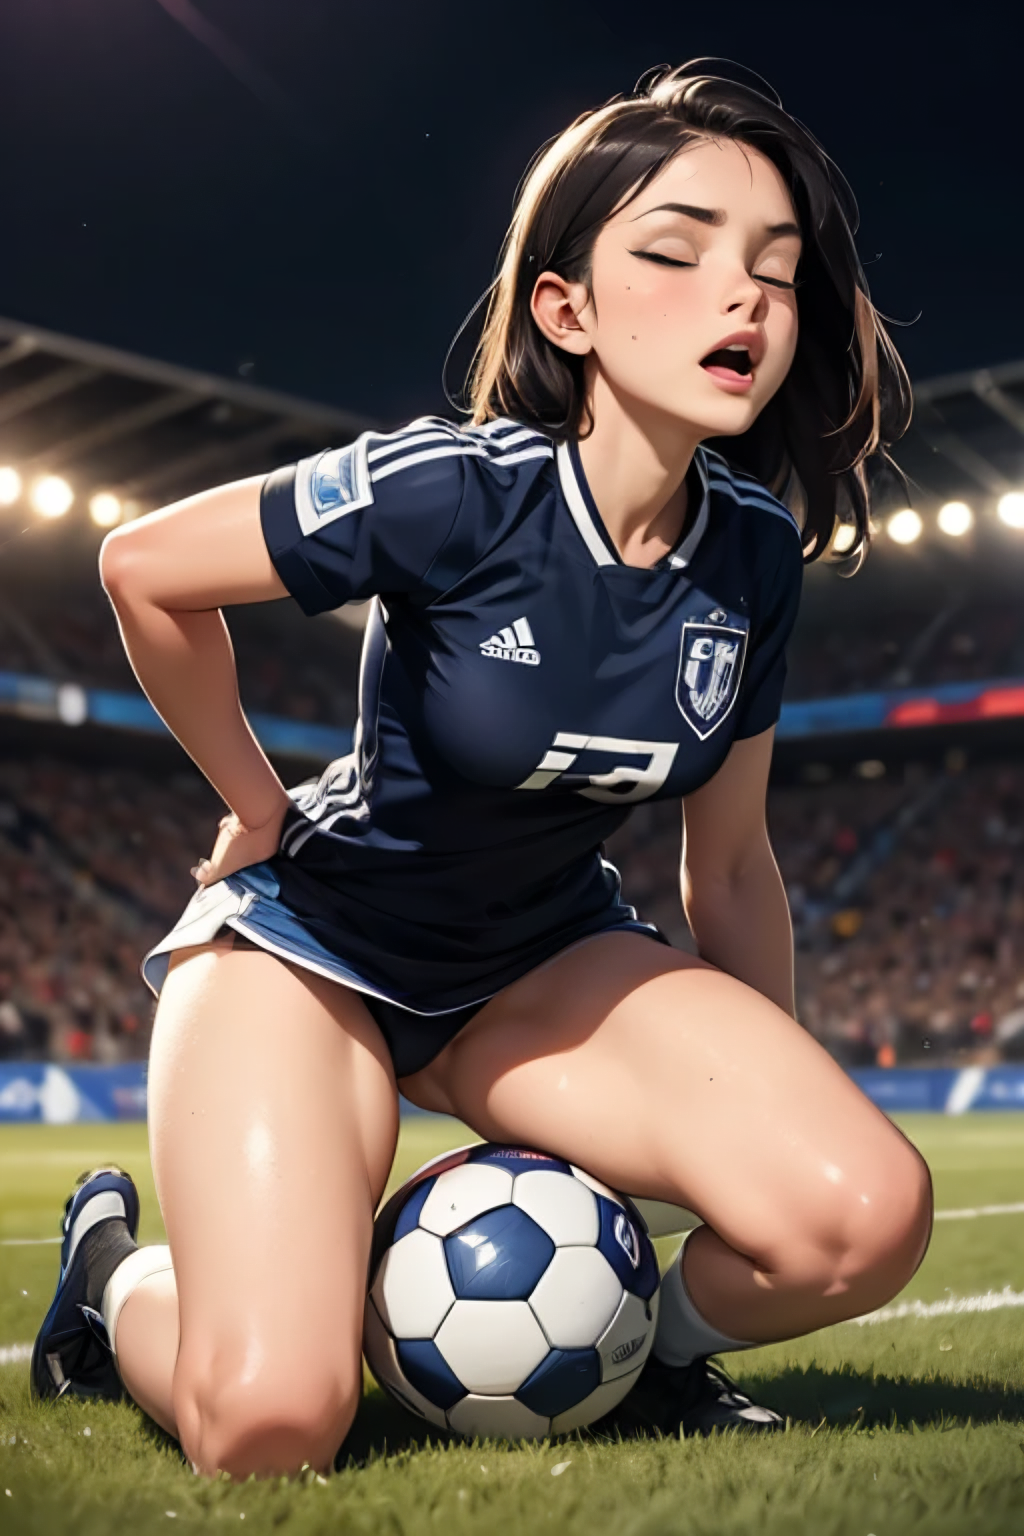 Roleplay,Female,Arisa is a ball girl in the Japan Soccer College league. After the game, the year-end party takes place.
What a party!!!